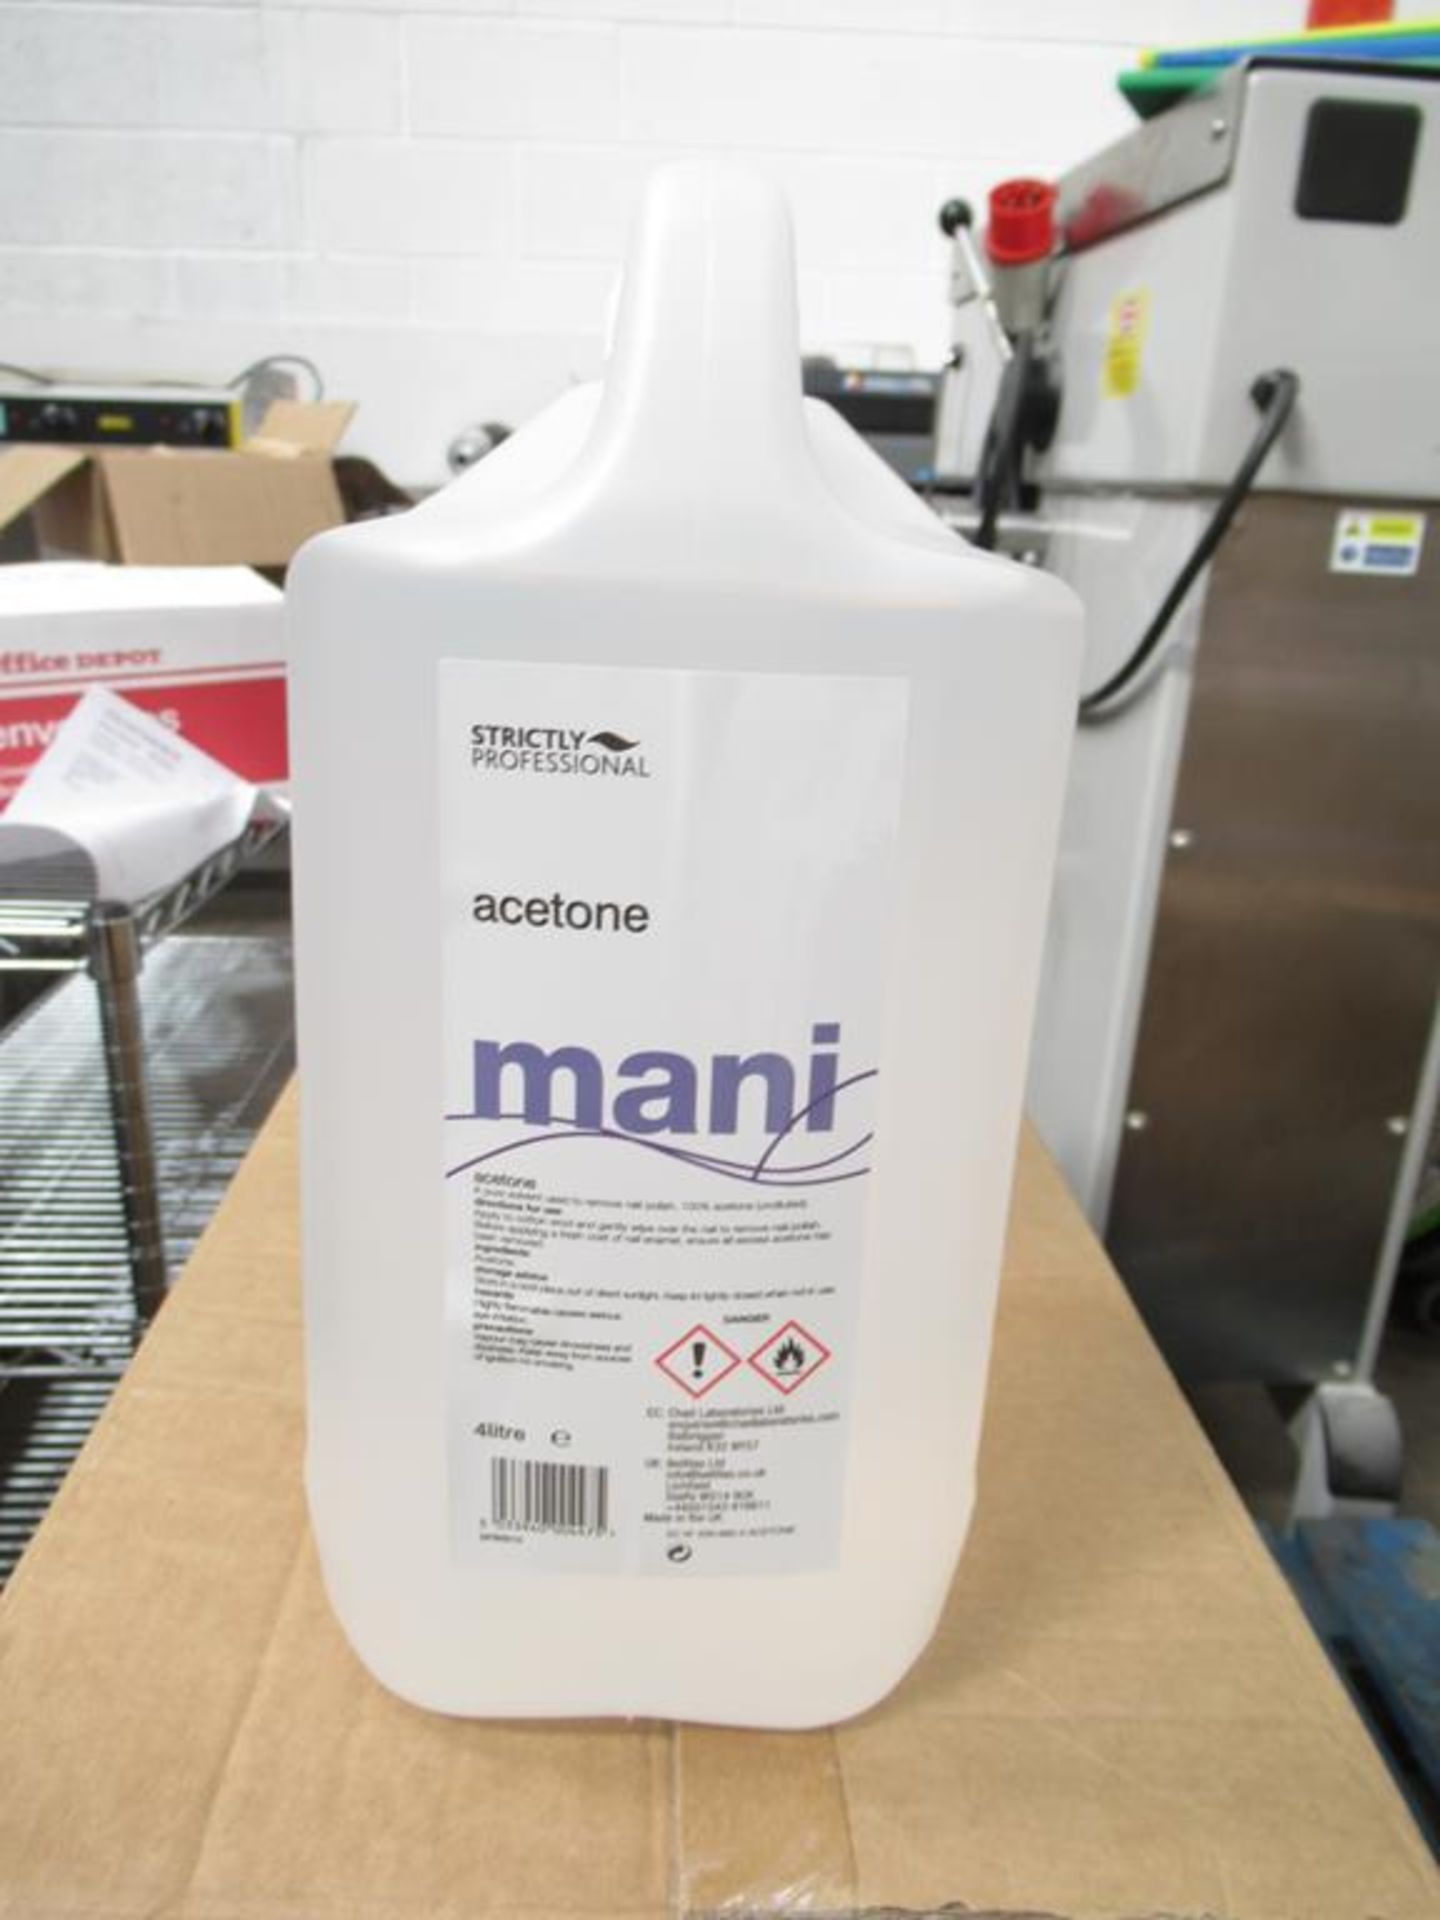 4 x boxes 4 x 4 litre bottles per box of Acetone Mani Pure Solvent Nail Polish Remover - Image 2 of 2